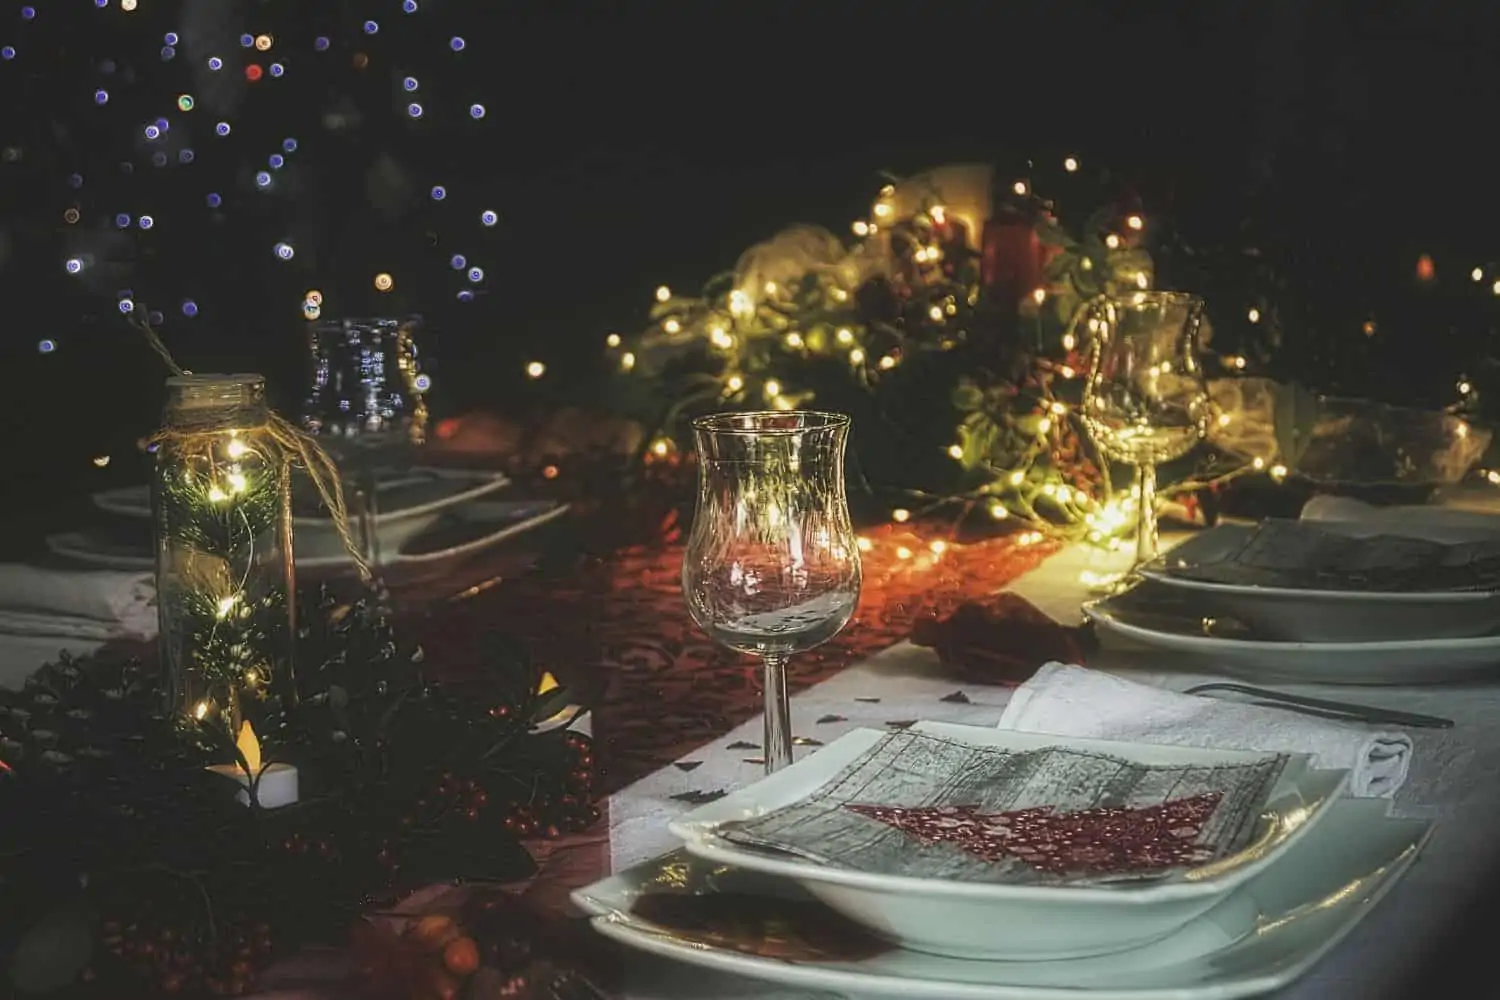 Ideas to spruce up your Christmas table!